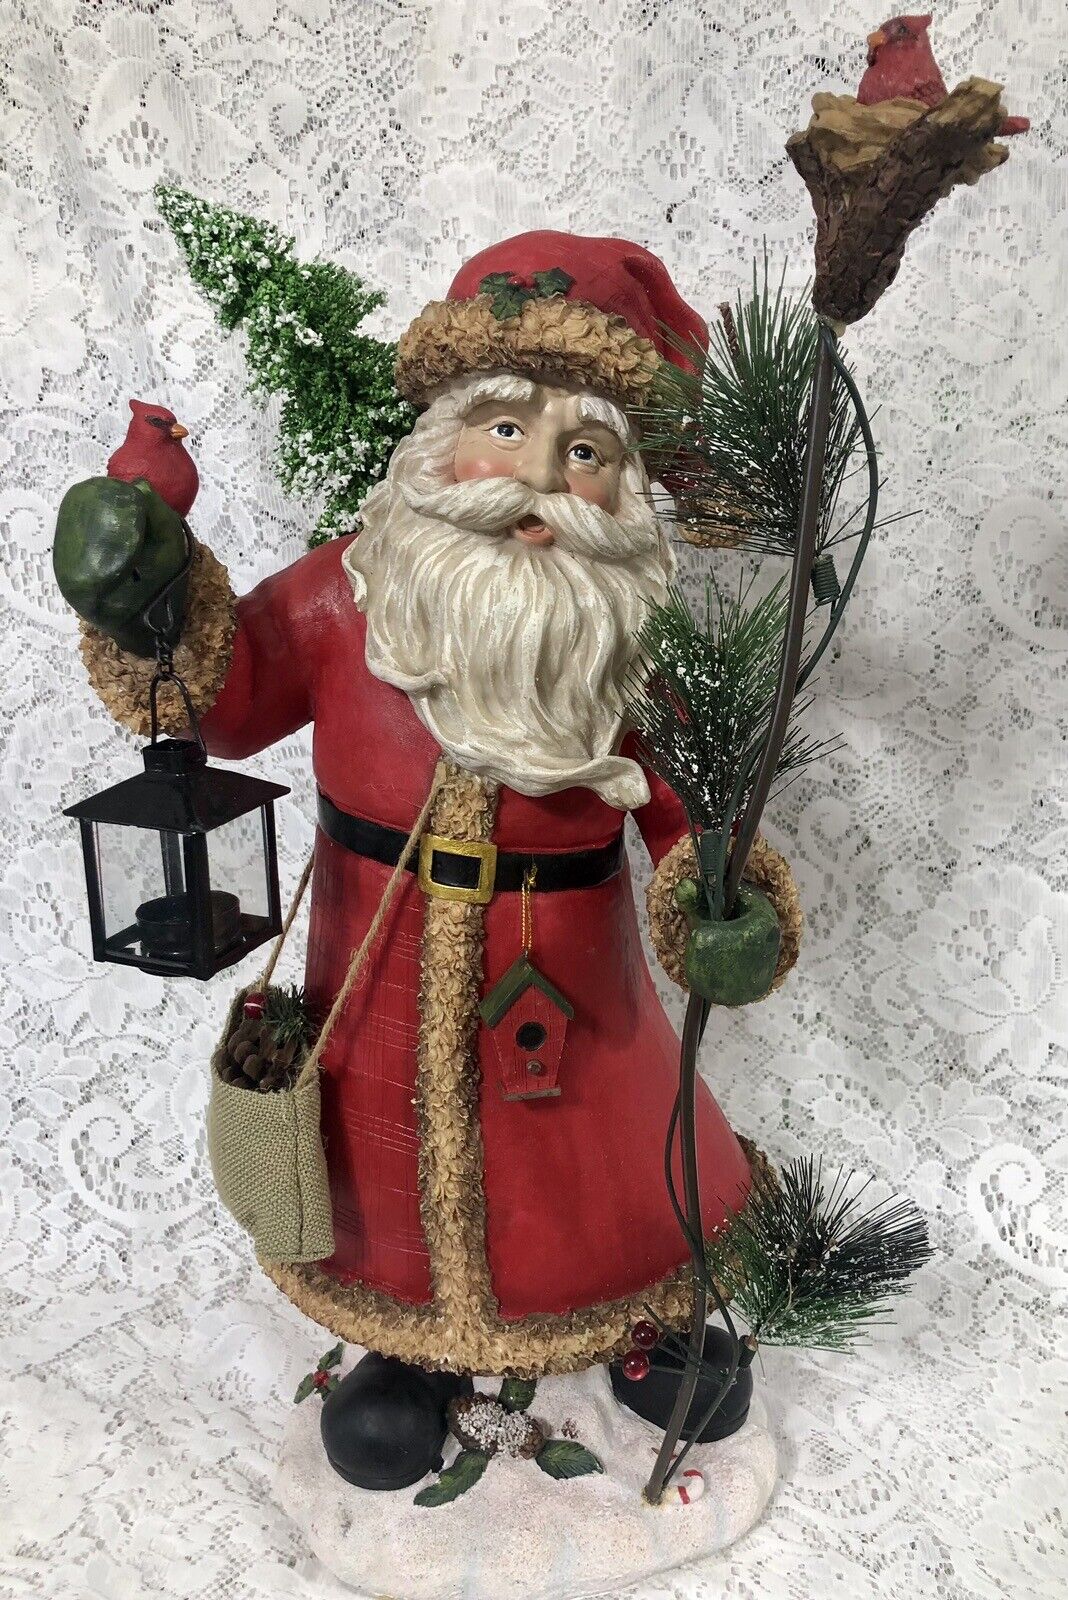 Exceptional 20 1/2” Santa Clause with Cardinals, Lantern, Tree & Gifts 22” Tall